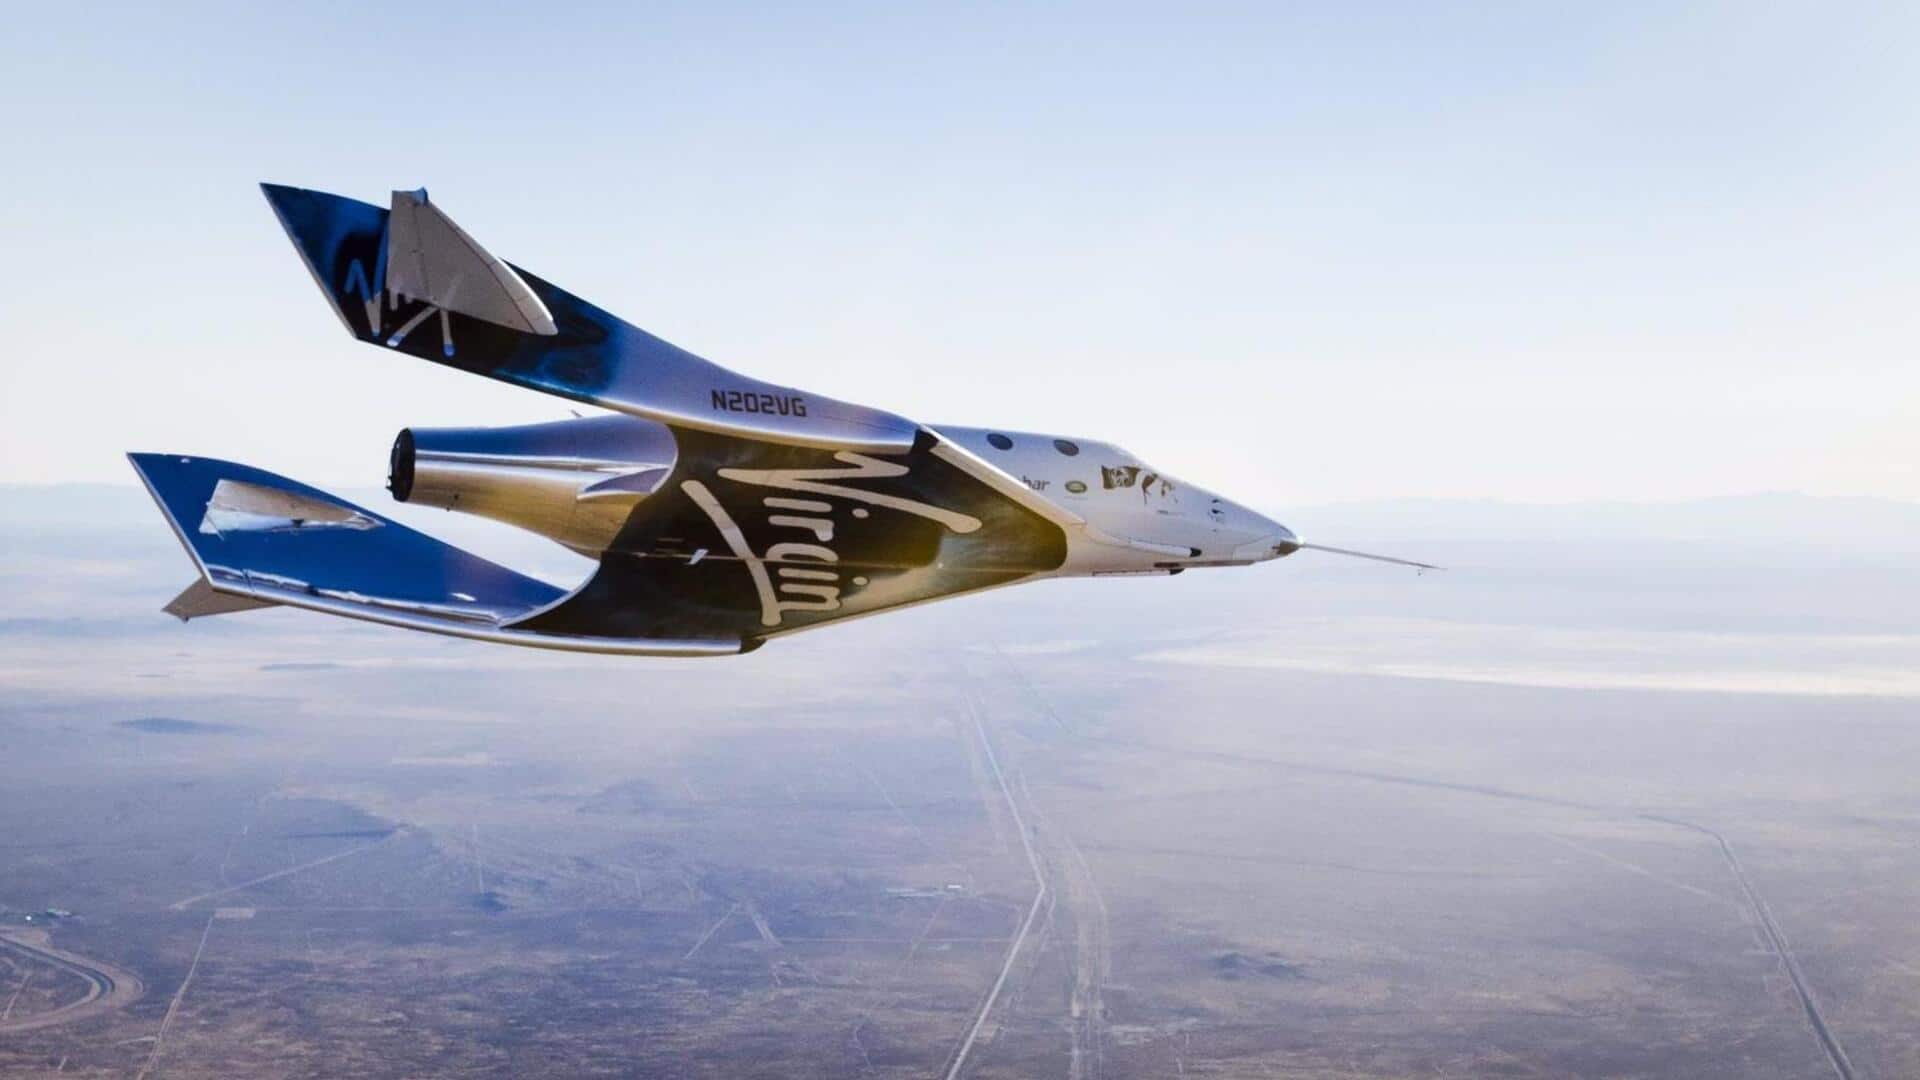 Virgin Galactic's third commercial spaceflight scheduled for September 8